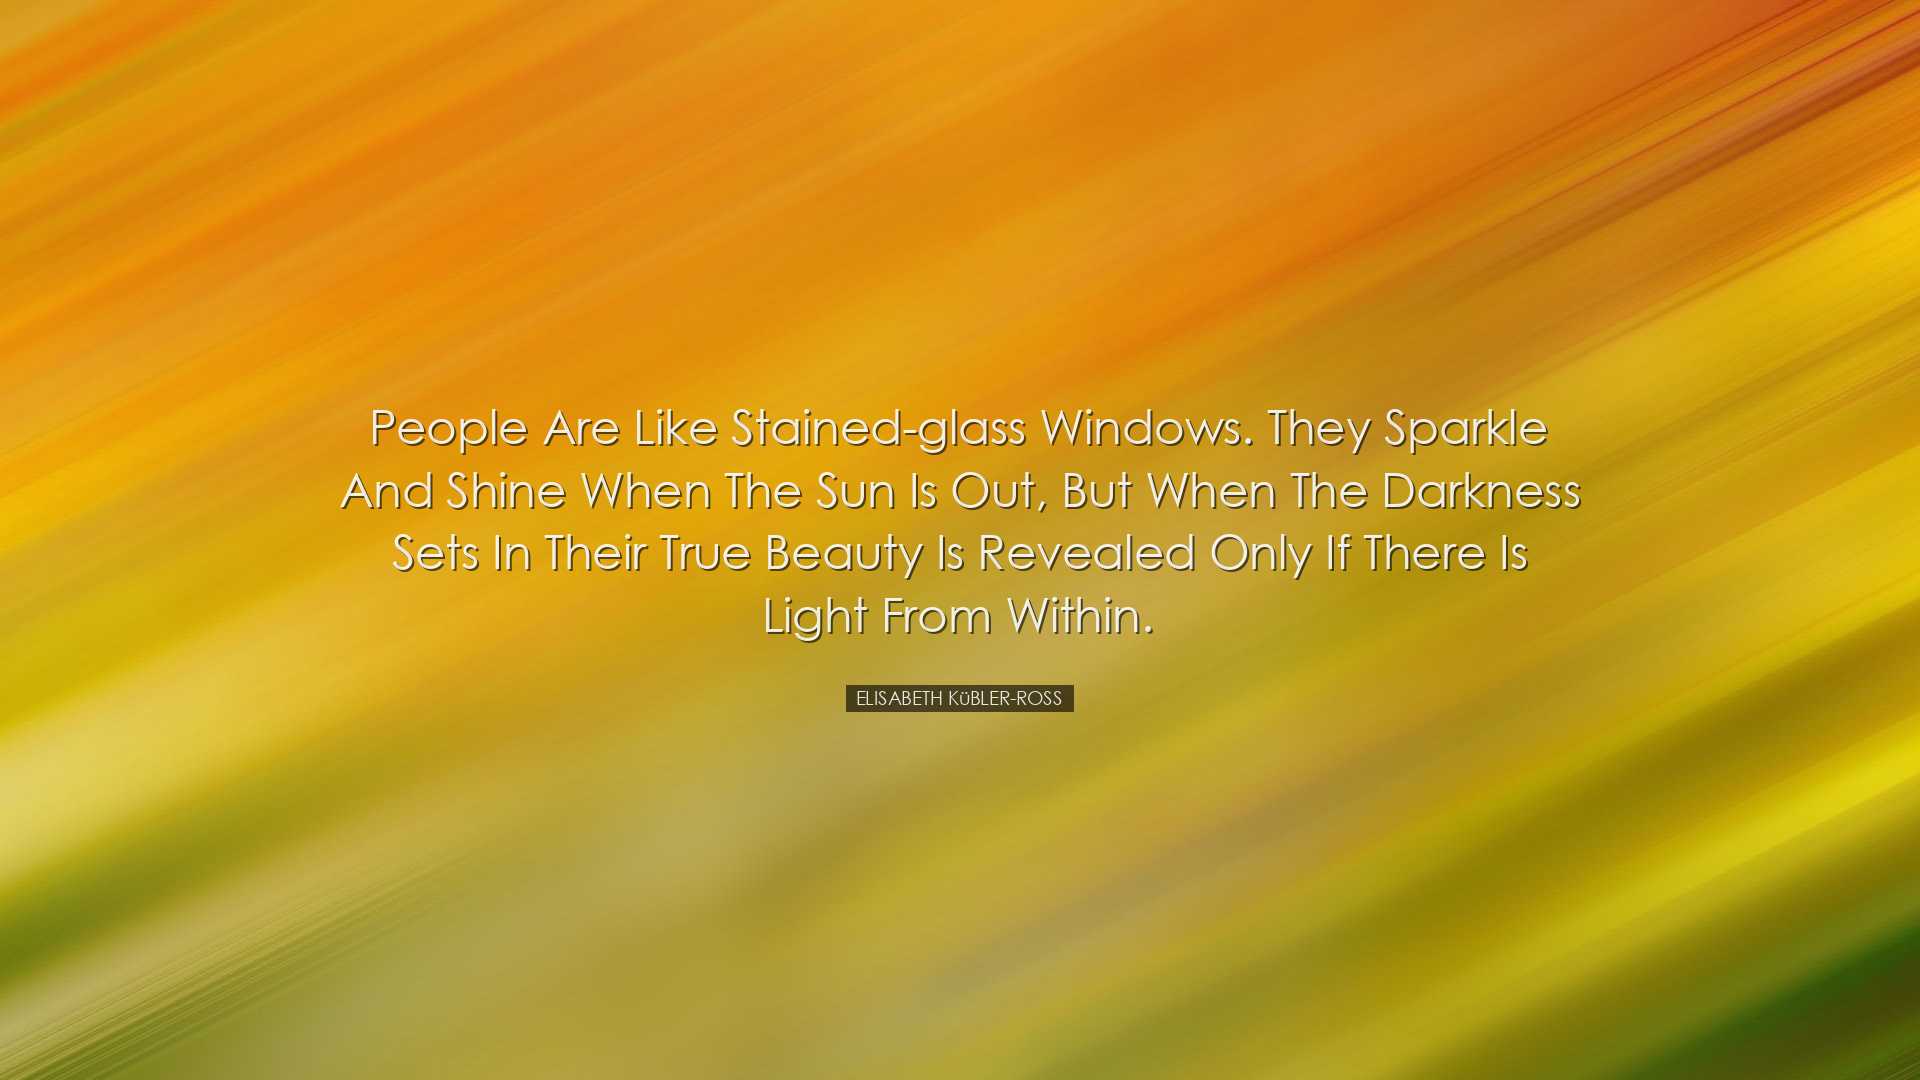 People are like stained-glass windows. They sparkle and shine when